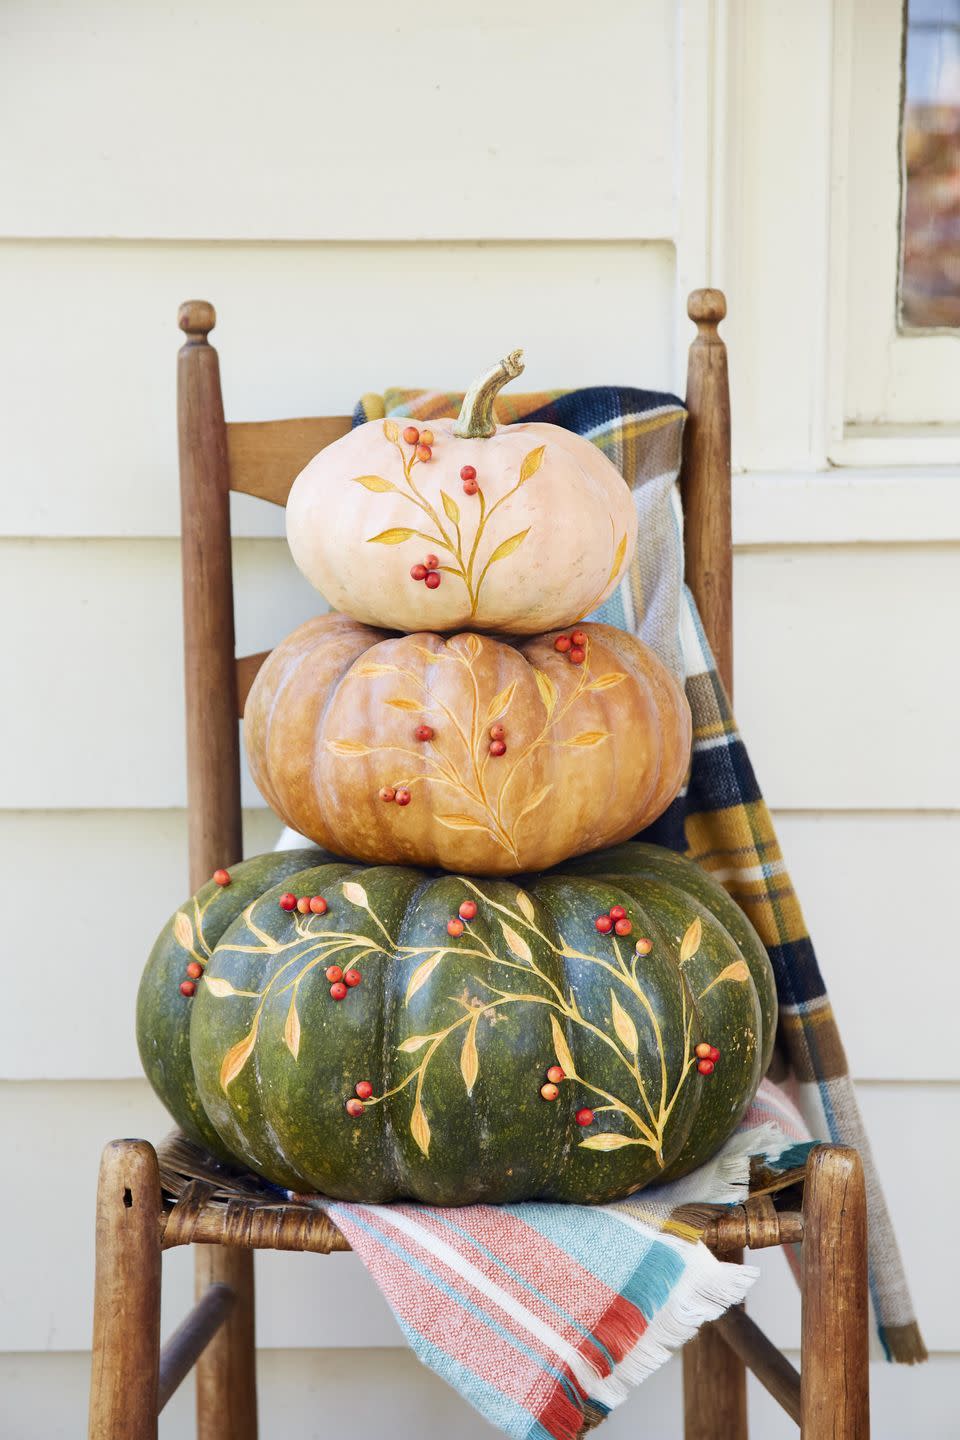 <p>The perfect sophisticated decor for greeting guests to your front door. Place directly on the porch or layer on a vintage ladderback chair with different color plaid blankets.</p><p><strong>To make:</strong> Purchase one large, one medium, and one small pumpkin (any color combo works) that stack nicely. Remove the stems from the large and medium pumpkin. Lightly sketch a vine pattern on a pumpkin with a pencil. Use a linoleum carving tool to etch out the pattern. Once complete attach red berries or beads with hot glue.</p>